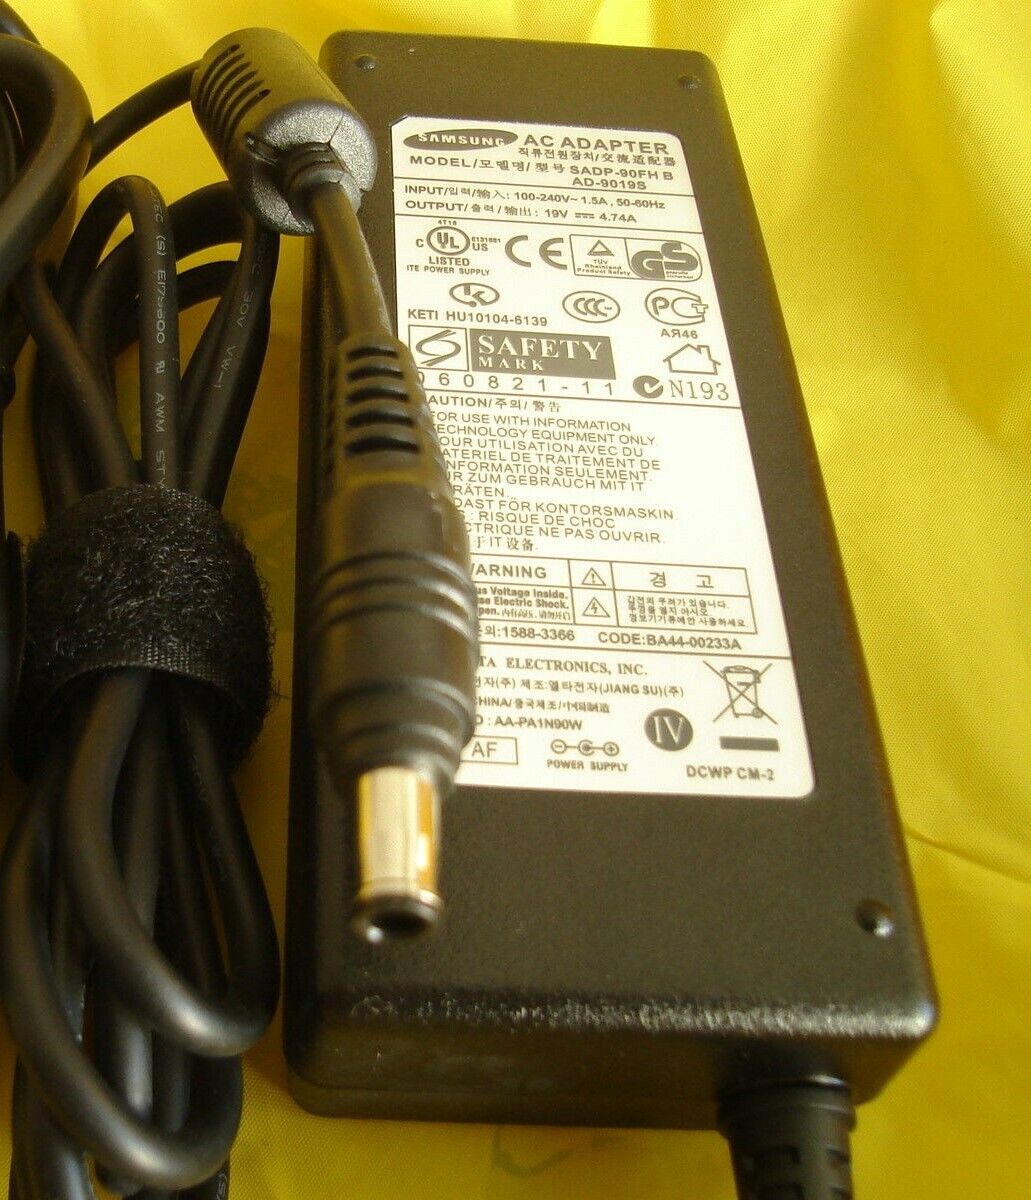 19v Genuine Samsung NP300E5A NP300E5AI NP300E5C NP300E5V Laptop Charger+Cord